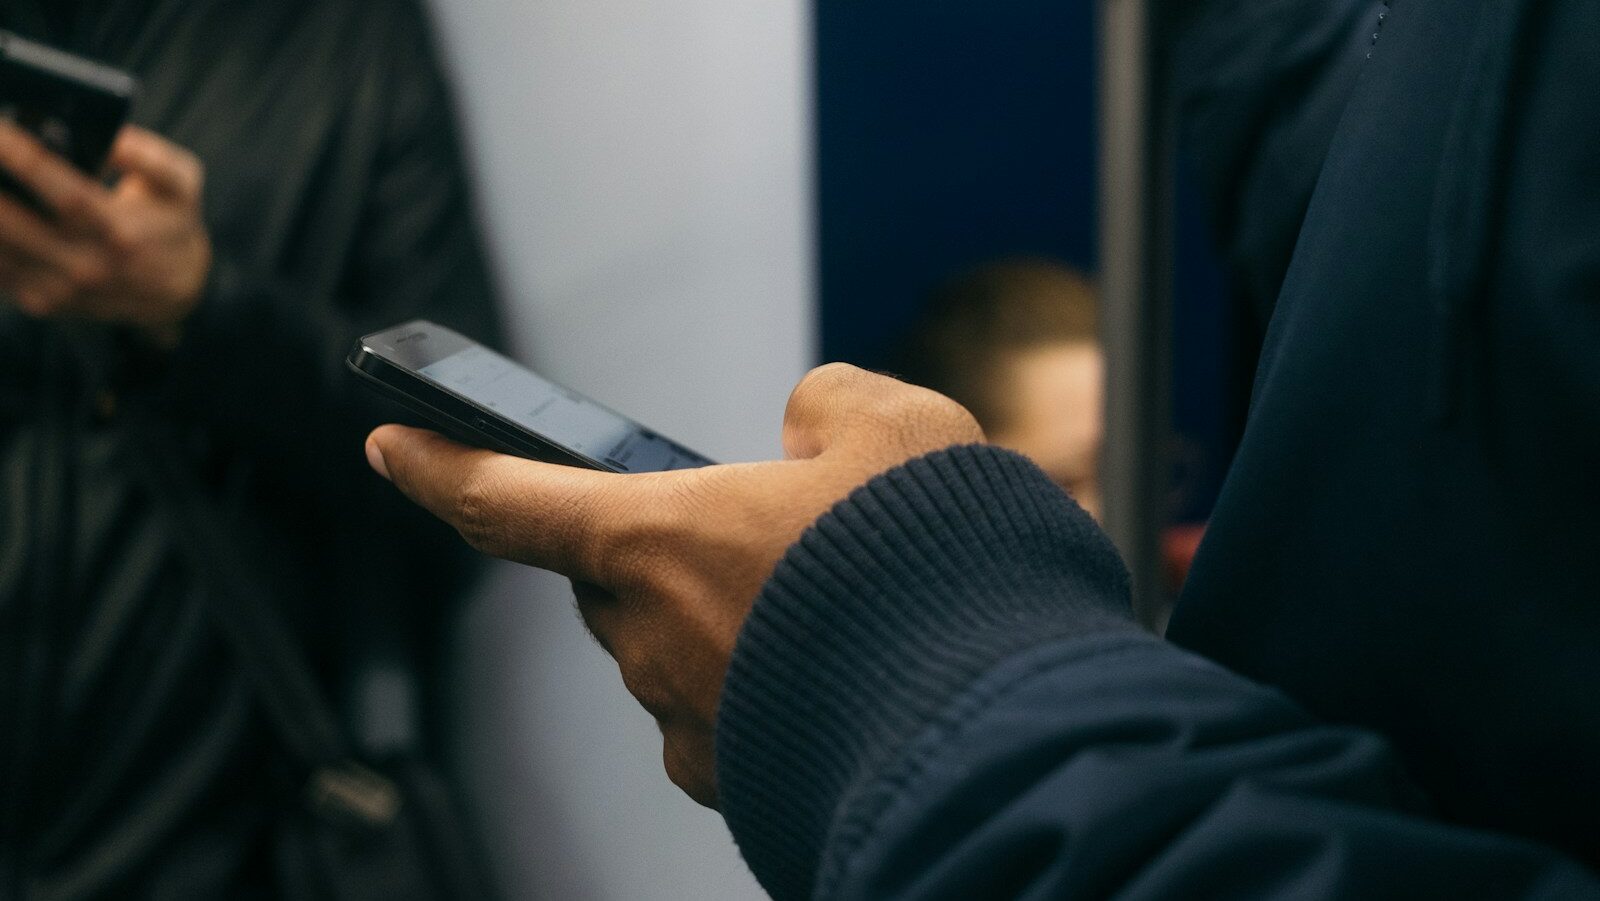 Two men on public transit using smart phones. Digital spaces like social media, news apps, and online games shape an individual's sense of self and social interactions.